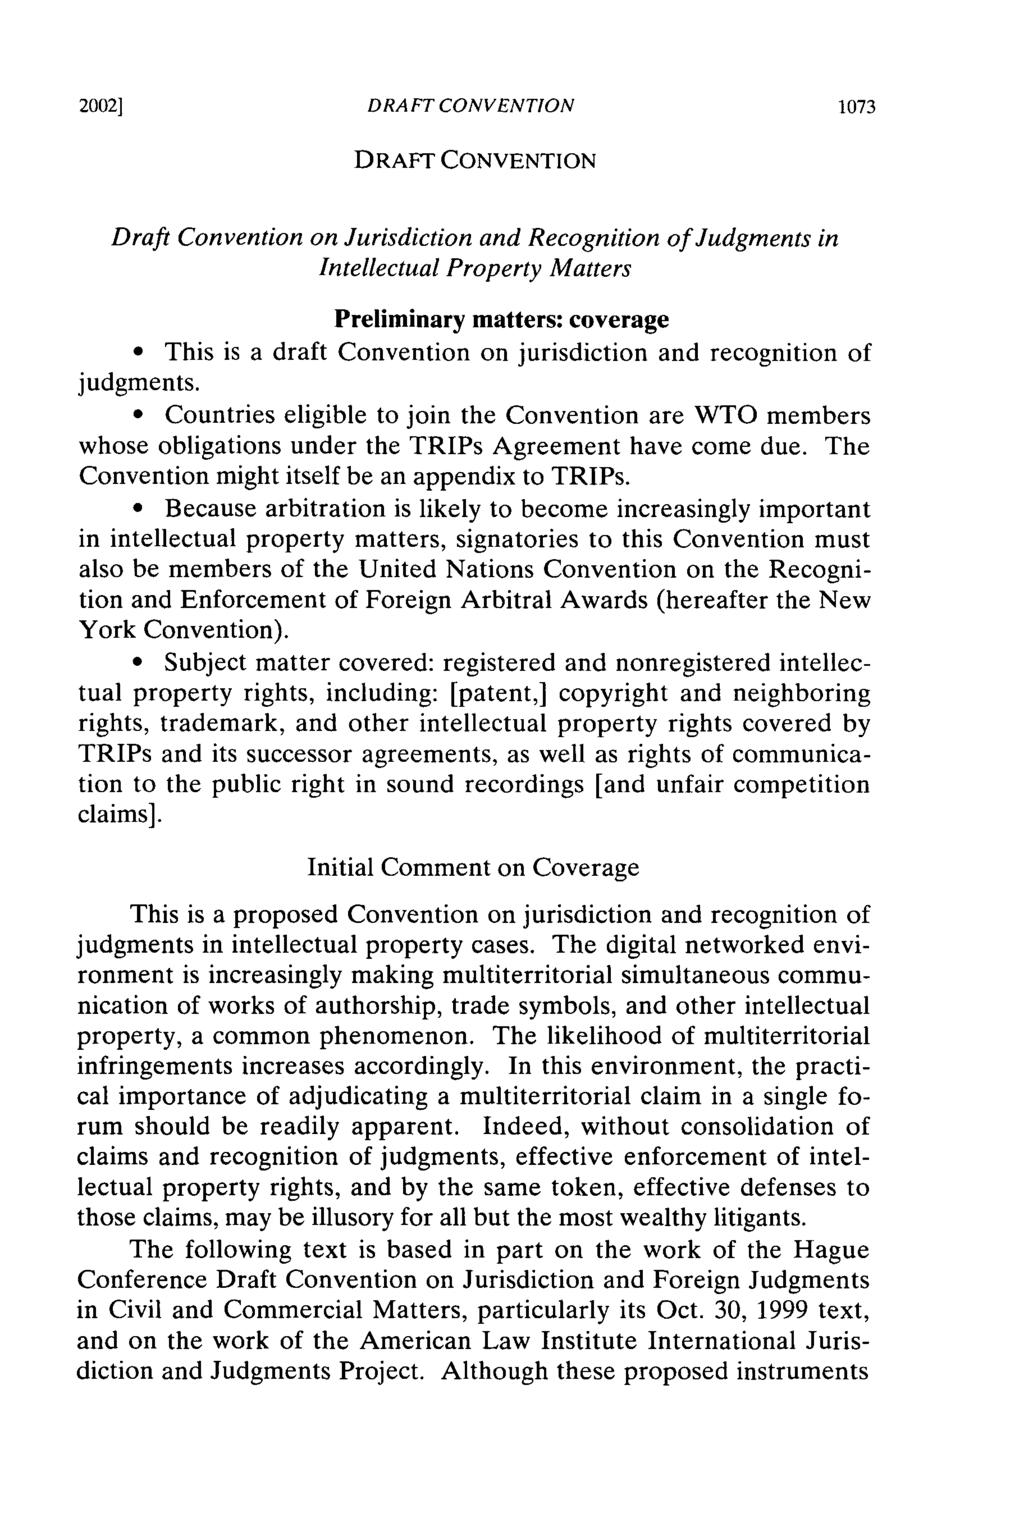 20021 DRAFT CONVENTION DRAFT CONVENTION Draft Convention on Jurisdiction and Recognition of Judgments in Intellectual Property Matters Preliminary matters: coverage * This is a draft Convention on